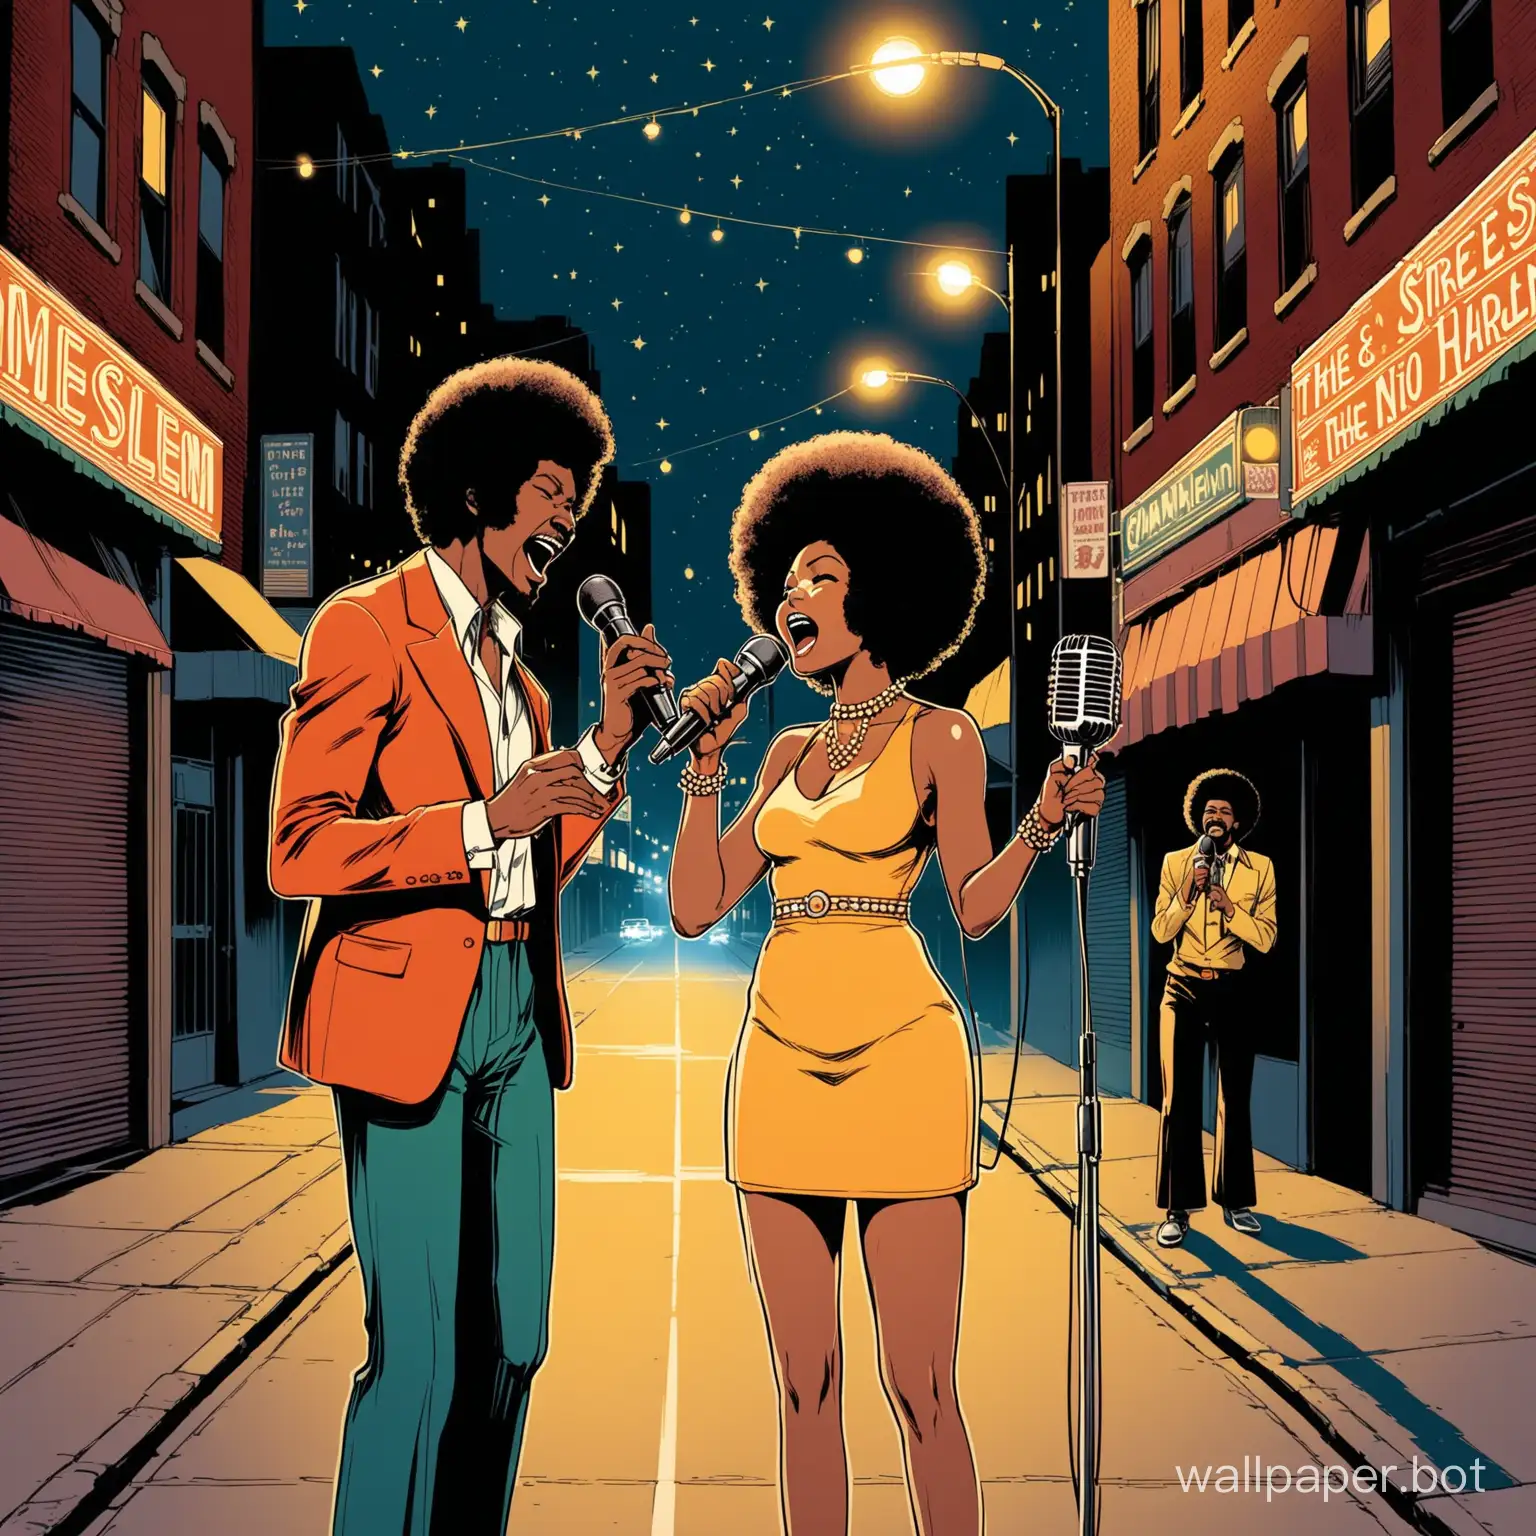 70's retro afro black singers 1 man and 1 woman singing with microphones the streets of Harlem  late at night, illustration